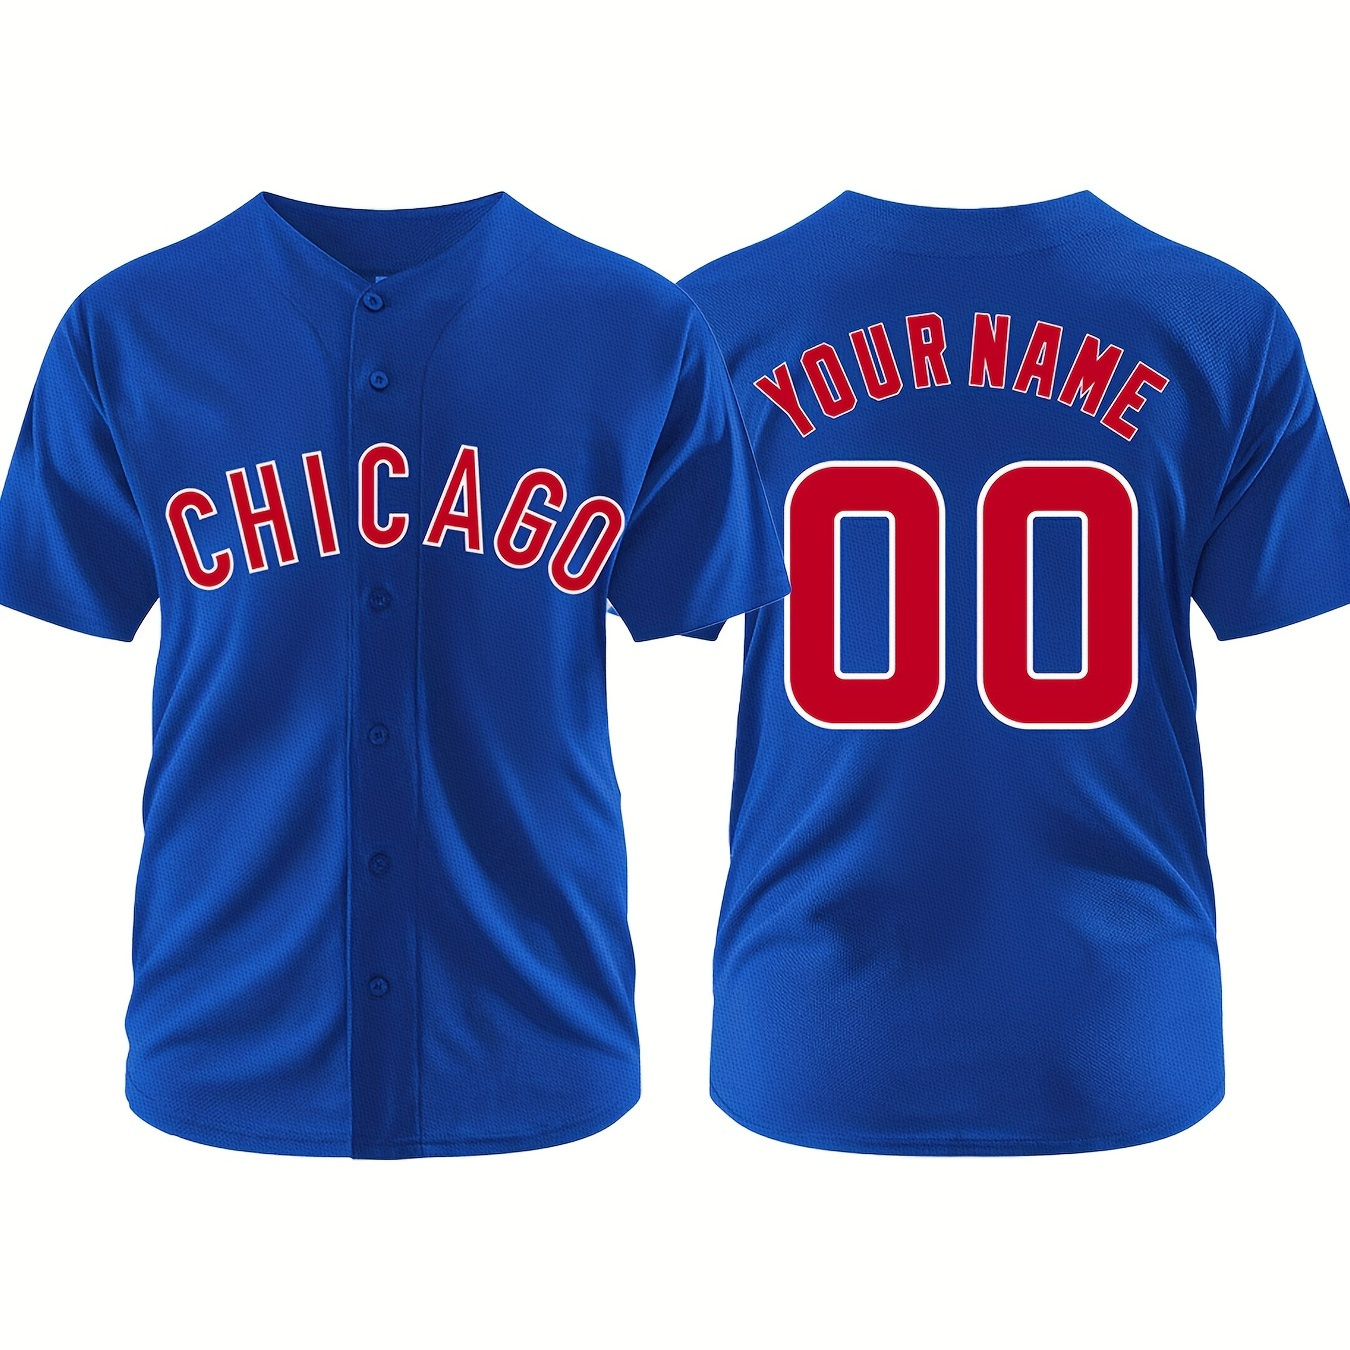 

Men's Customized Name & Number "chicago" Baseball Jersey, Tailored To Your Preference, Comfy Top For Summer Sport